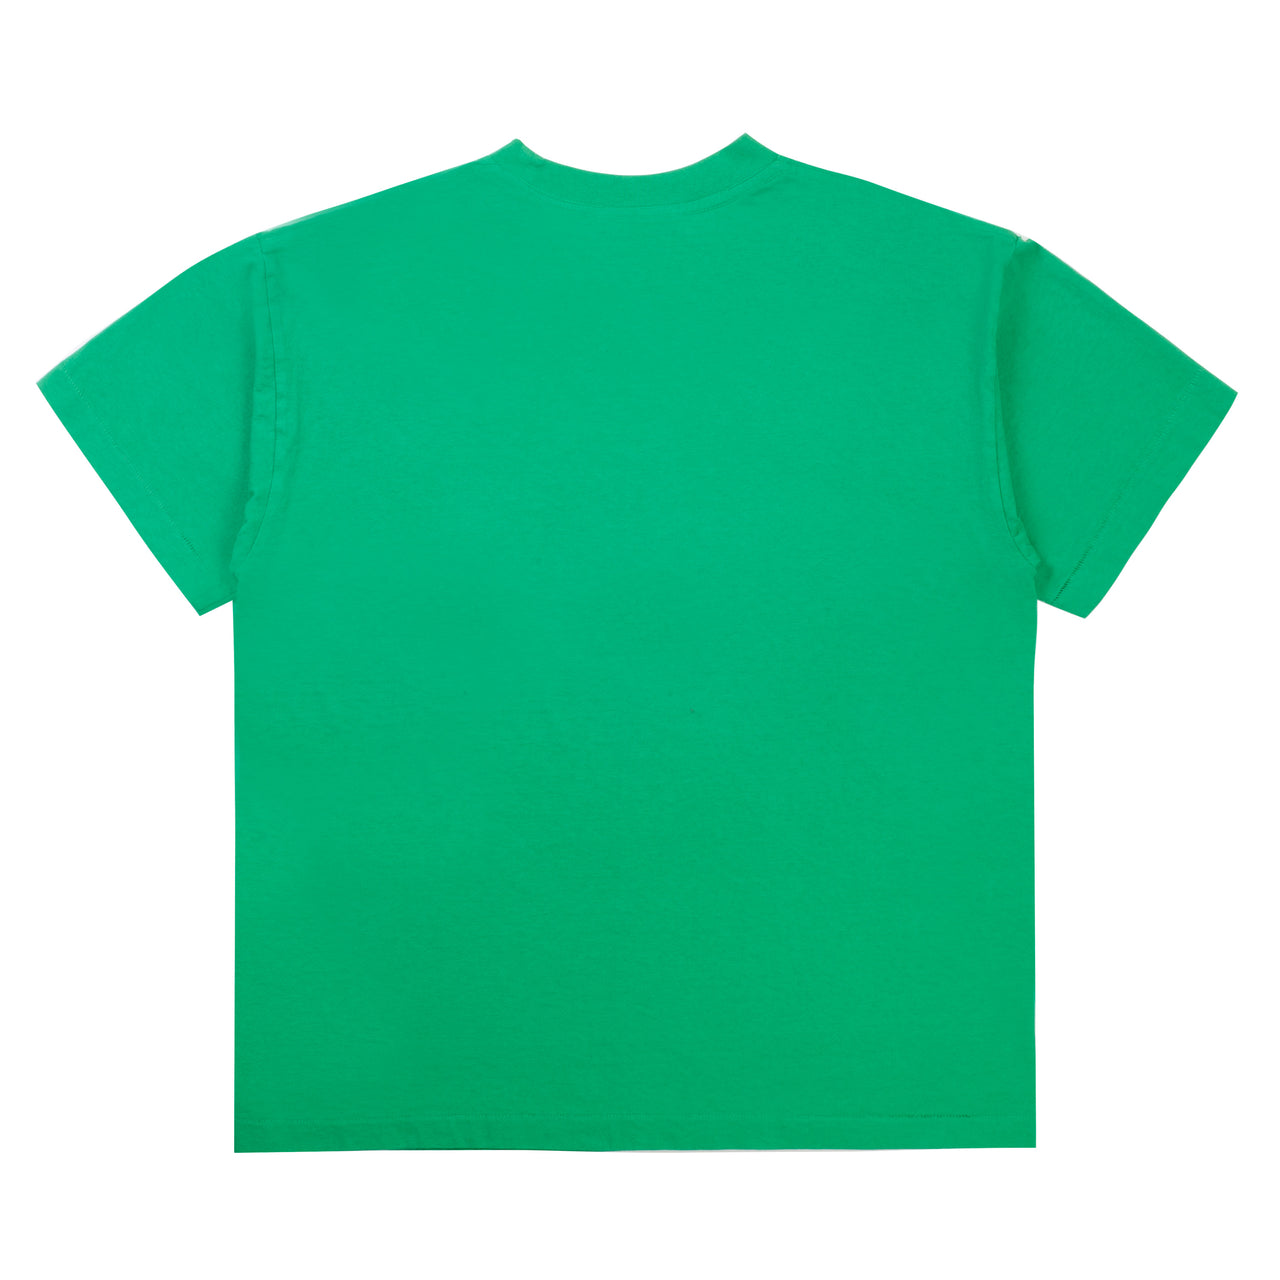 Pieces Perpetual Tee Kelly Green